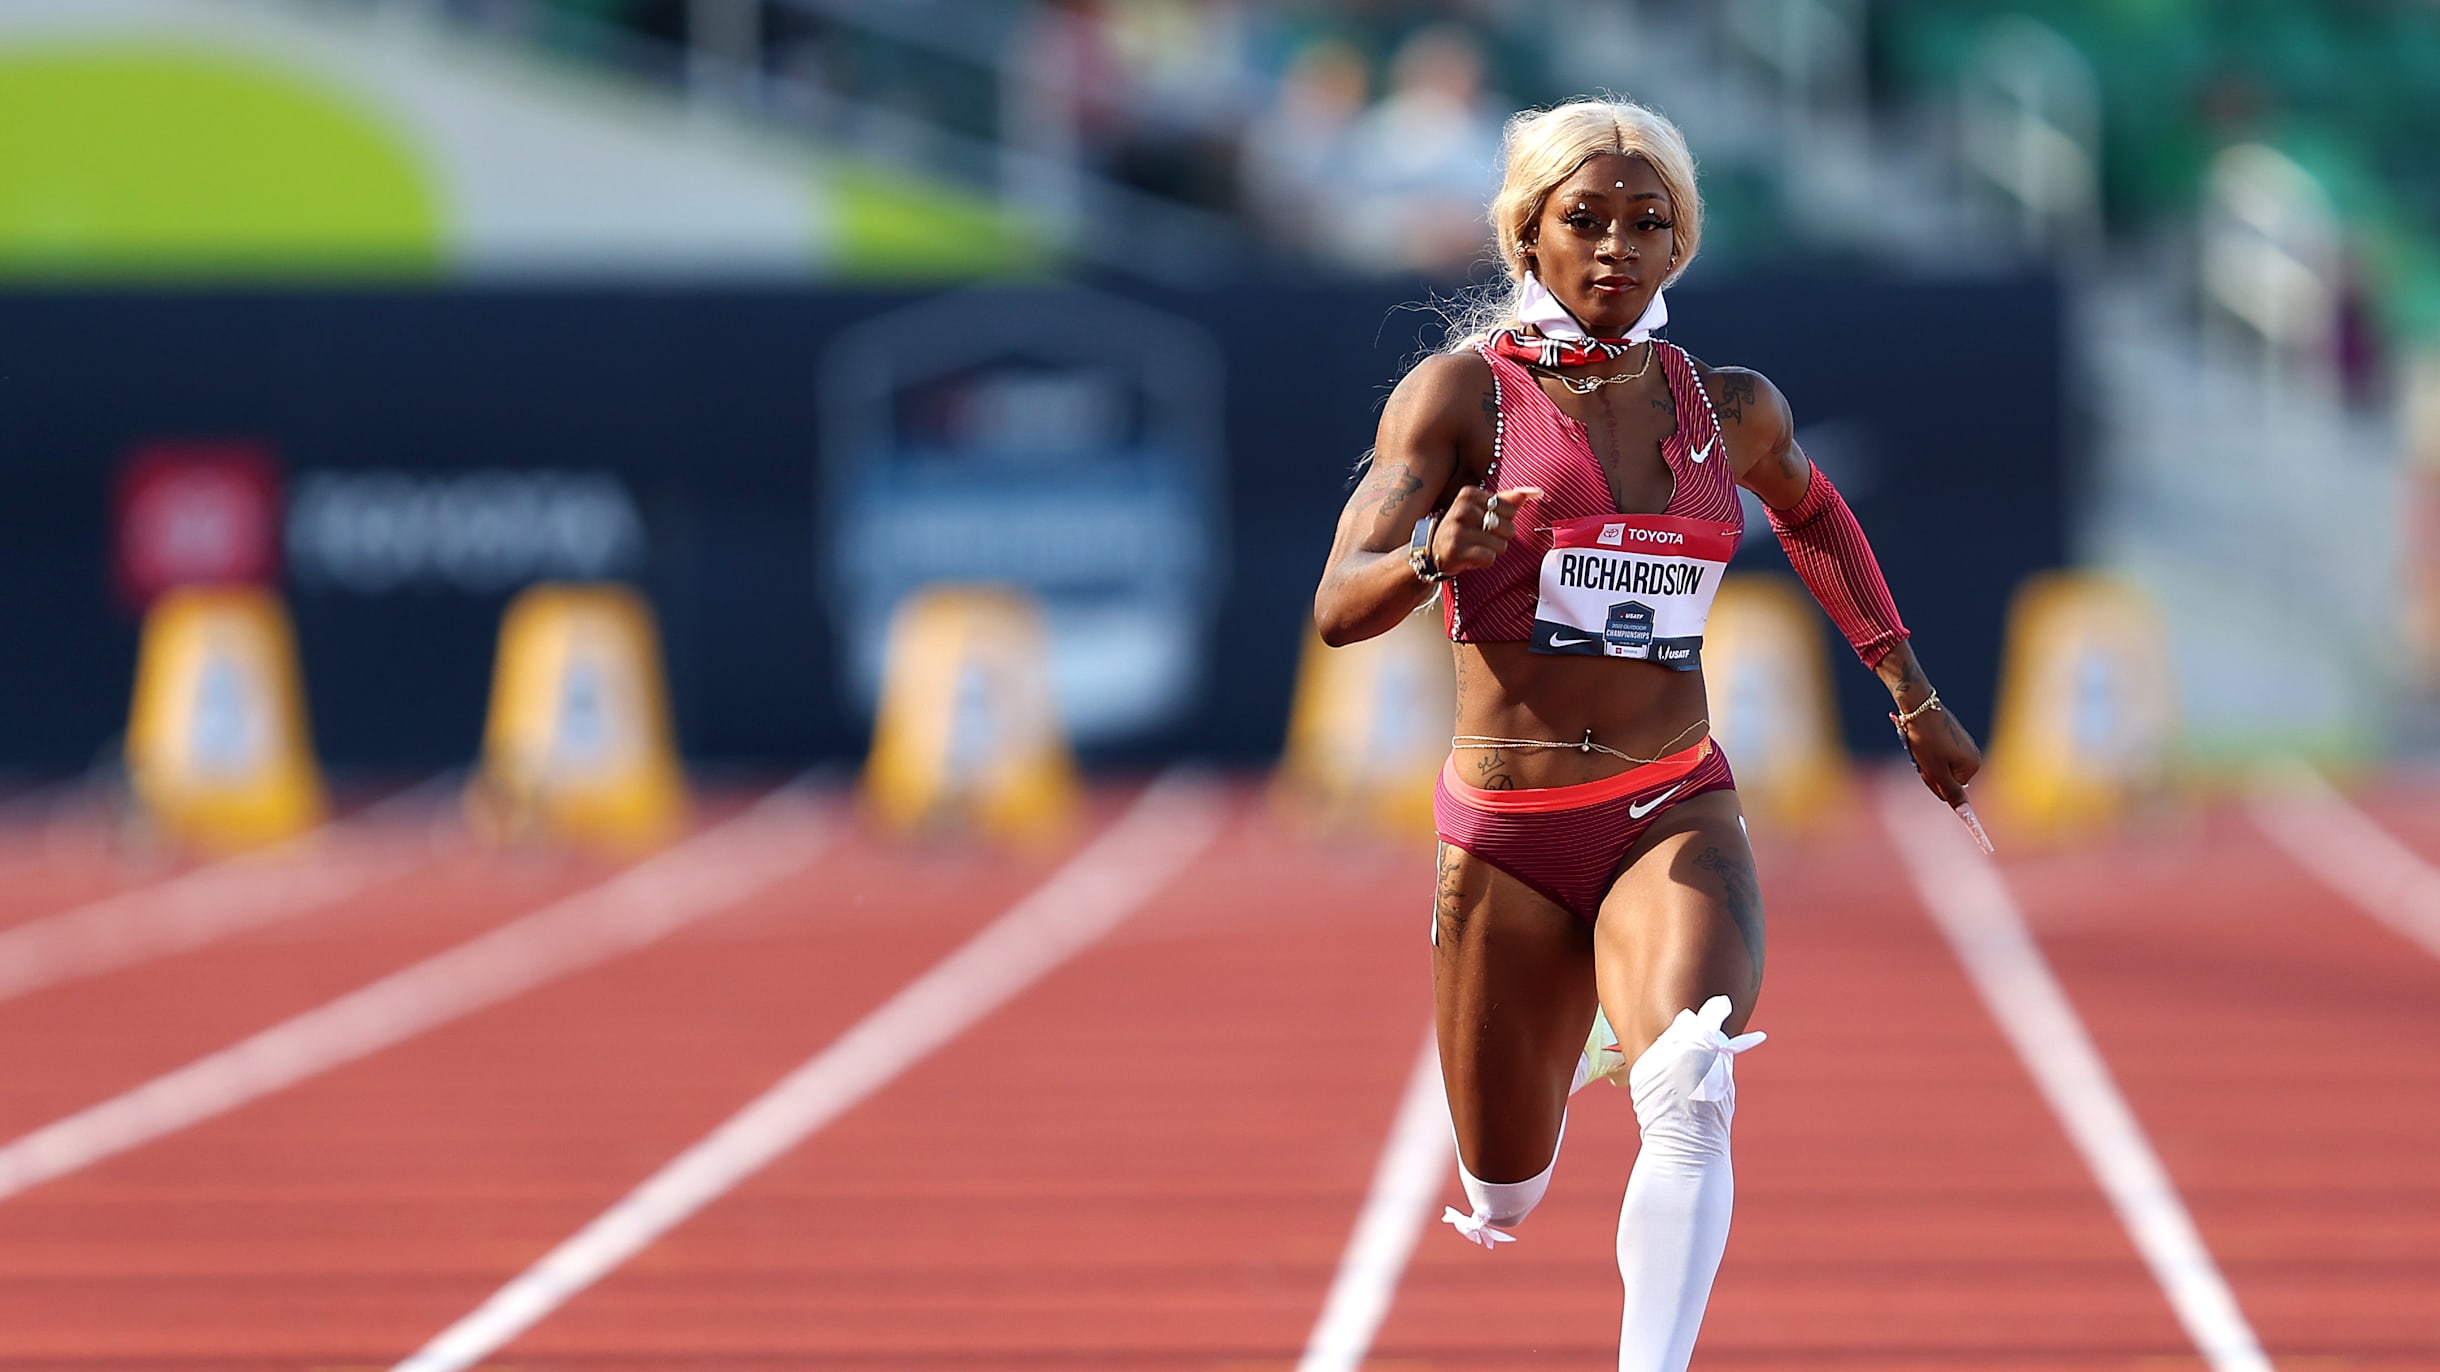 Who to Watch at the 2022 U.S. Track and Field Outdoor Championships